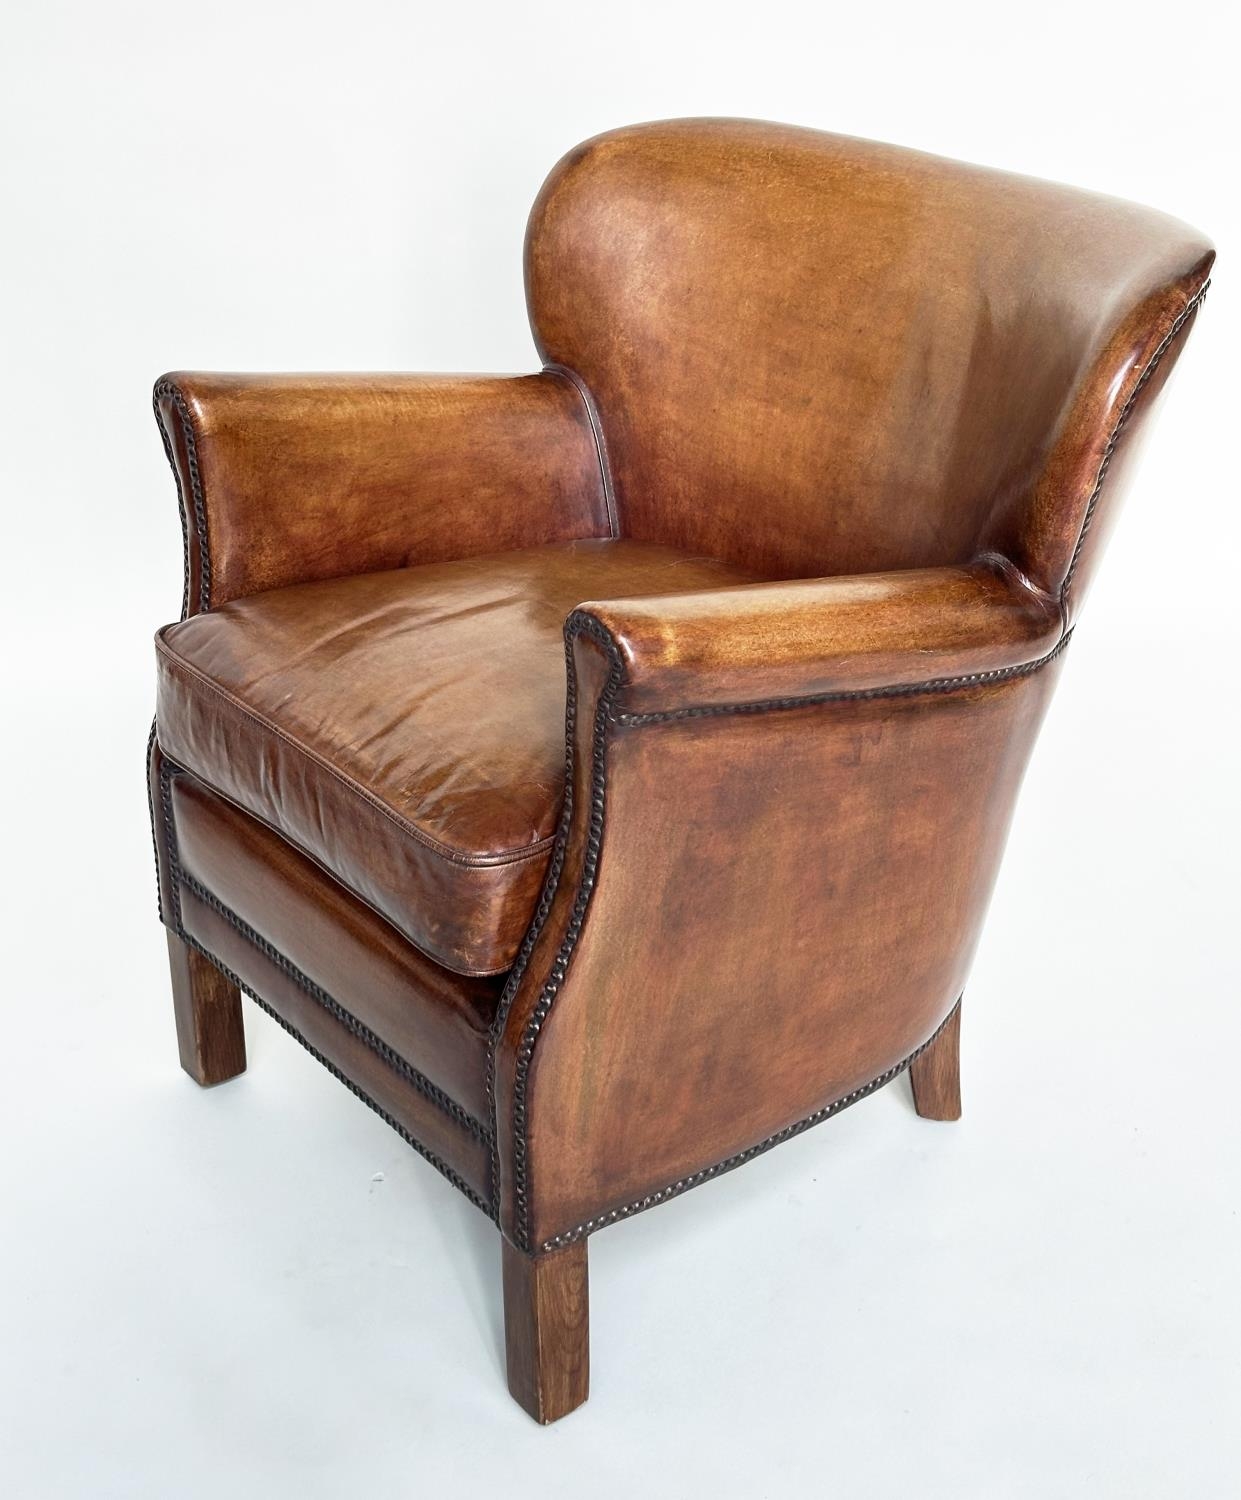 LITTLE PROFESSOR ARMCHAIR, in the manner of Timothy Oulton soft natural mid brown leather upholstery